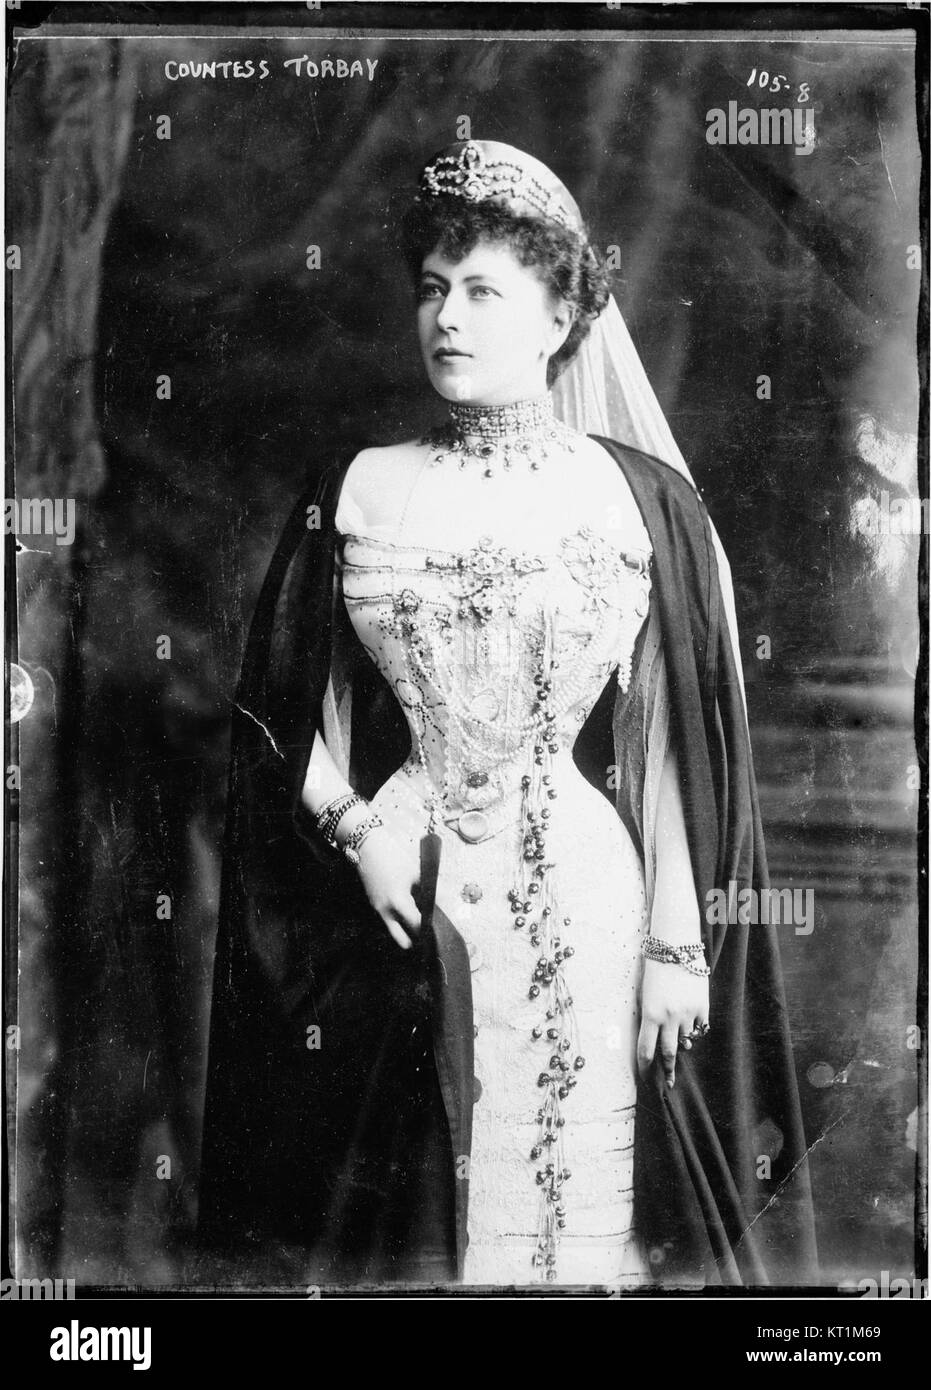 Countess Sophie of Merenberg, Countess de Torby (LOC ggbain.00604) Stock Photo